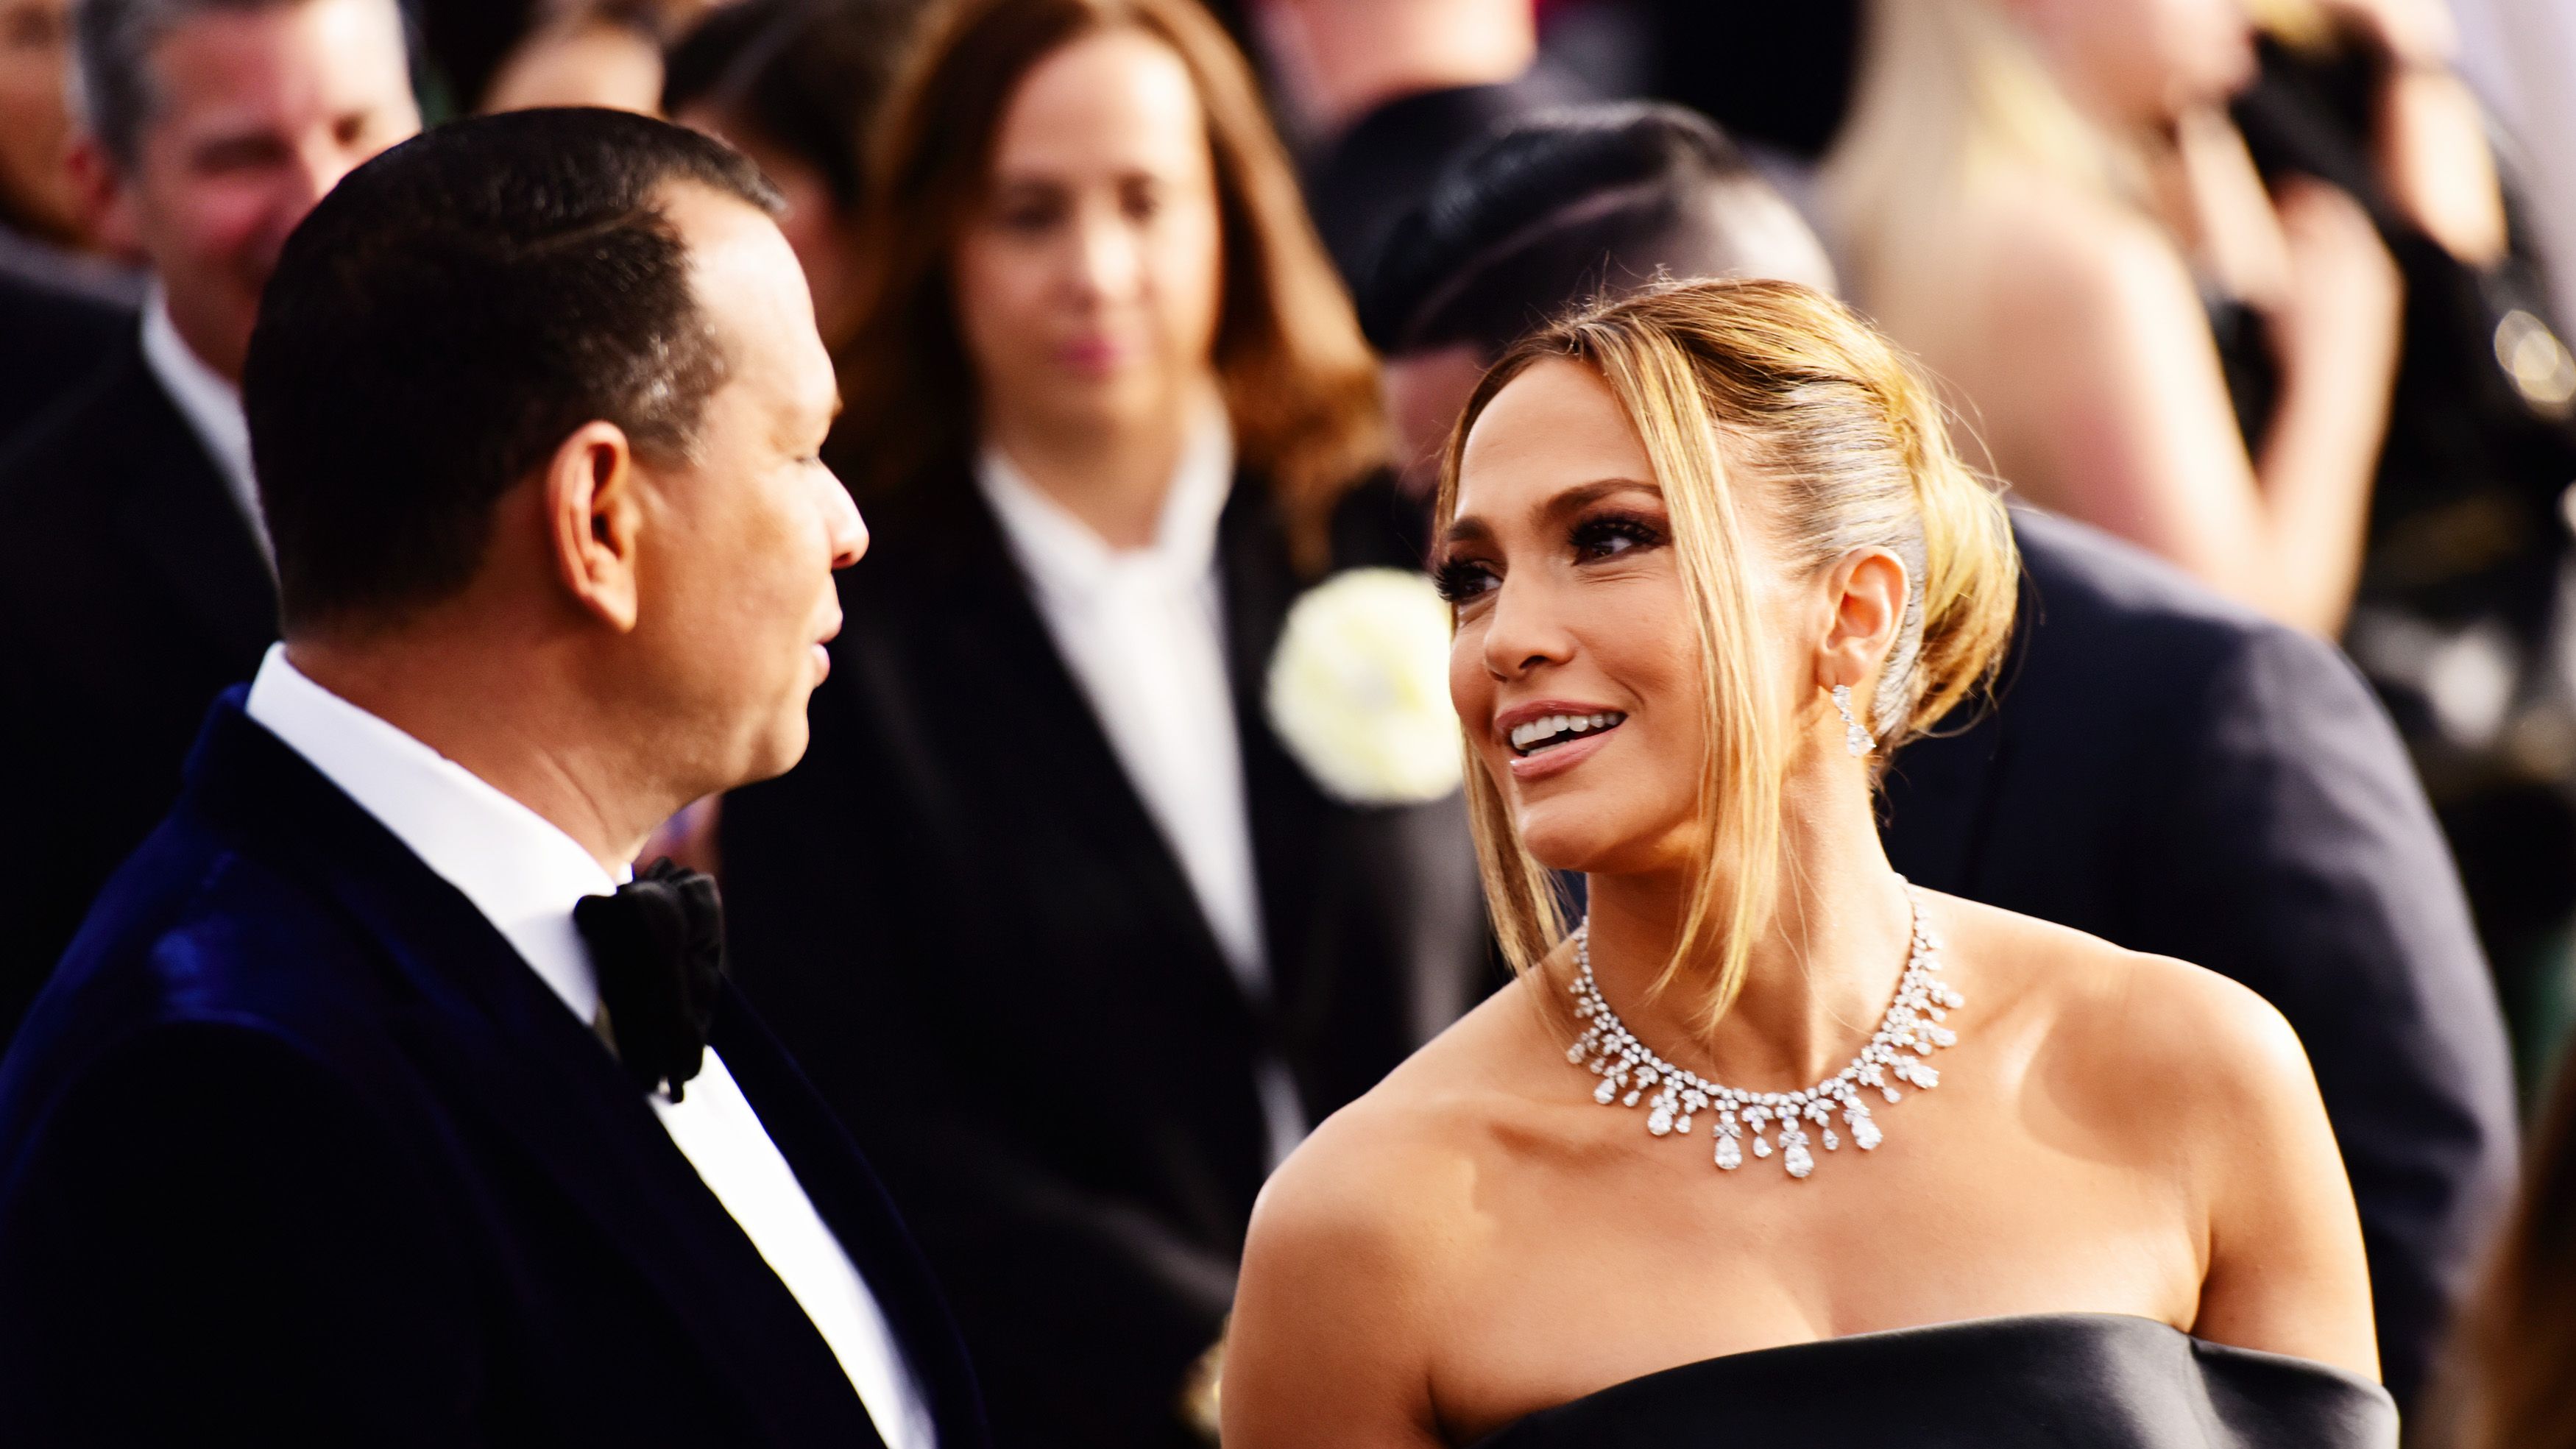 Alex Rodriguez Said He And Jennifer Lopez Have Had Family Meals Every Night